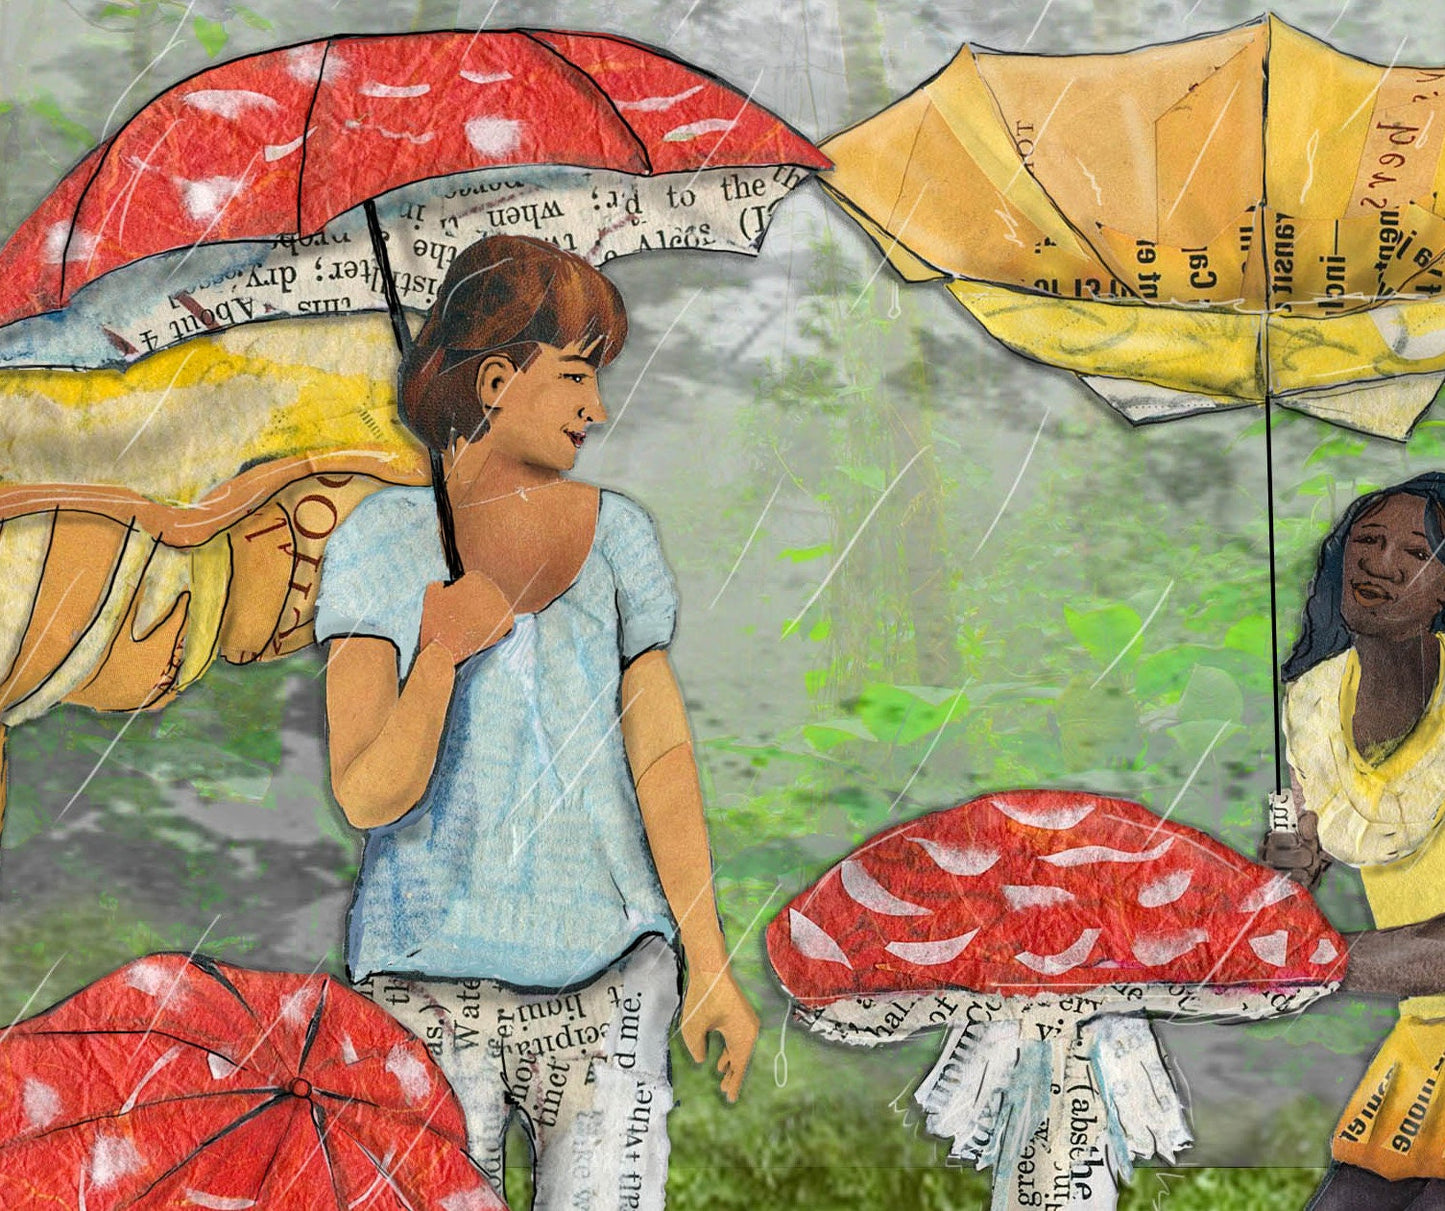 Greeting Card of mixed media collage of people with umbrellas walking among mushrooms, magic, wild, connection to nature - Blank Inside